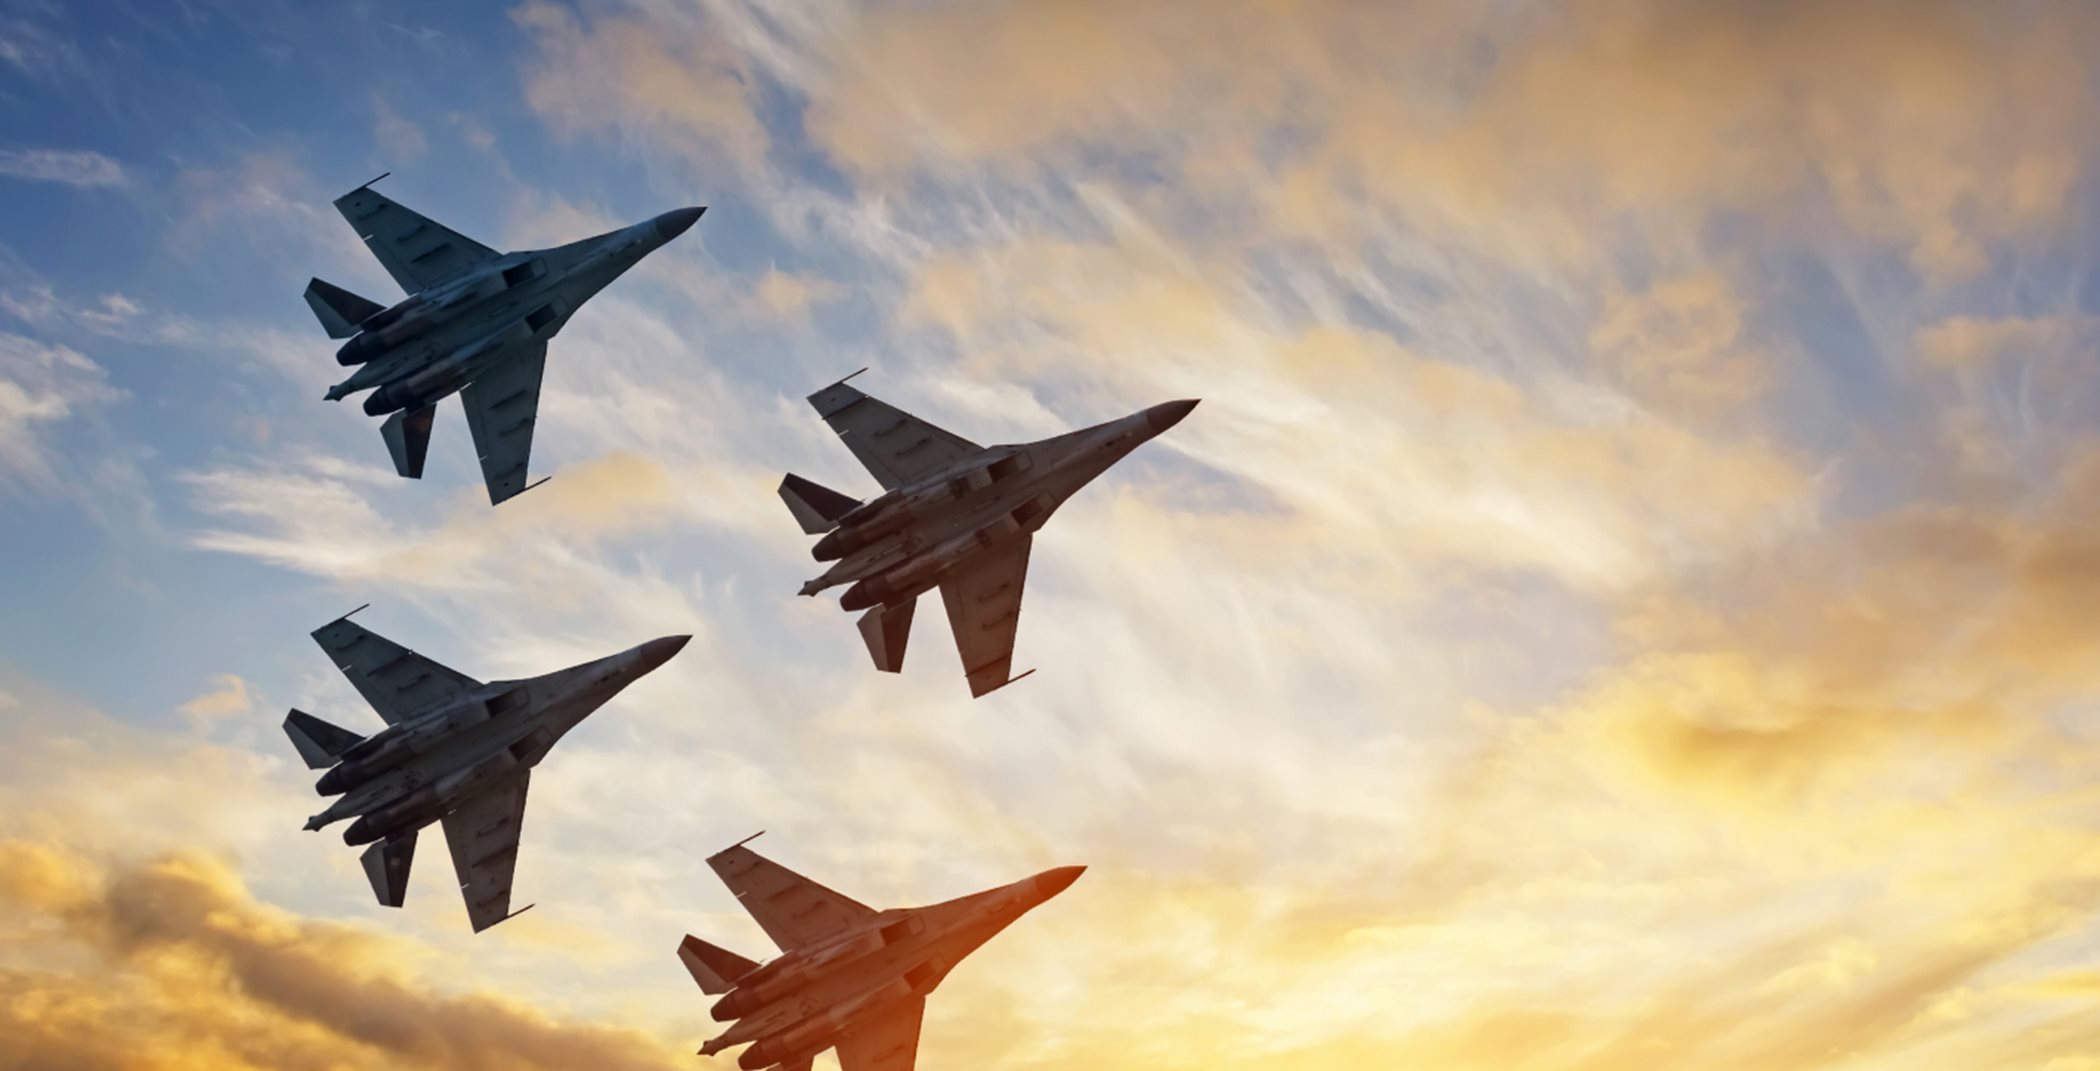 Fighter jets flying in formation ay golden hour